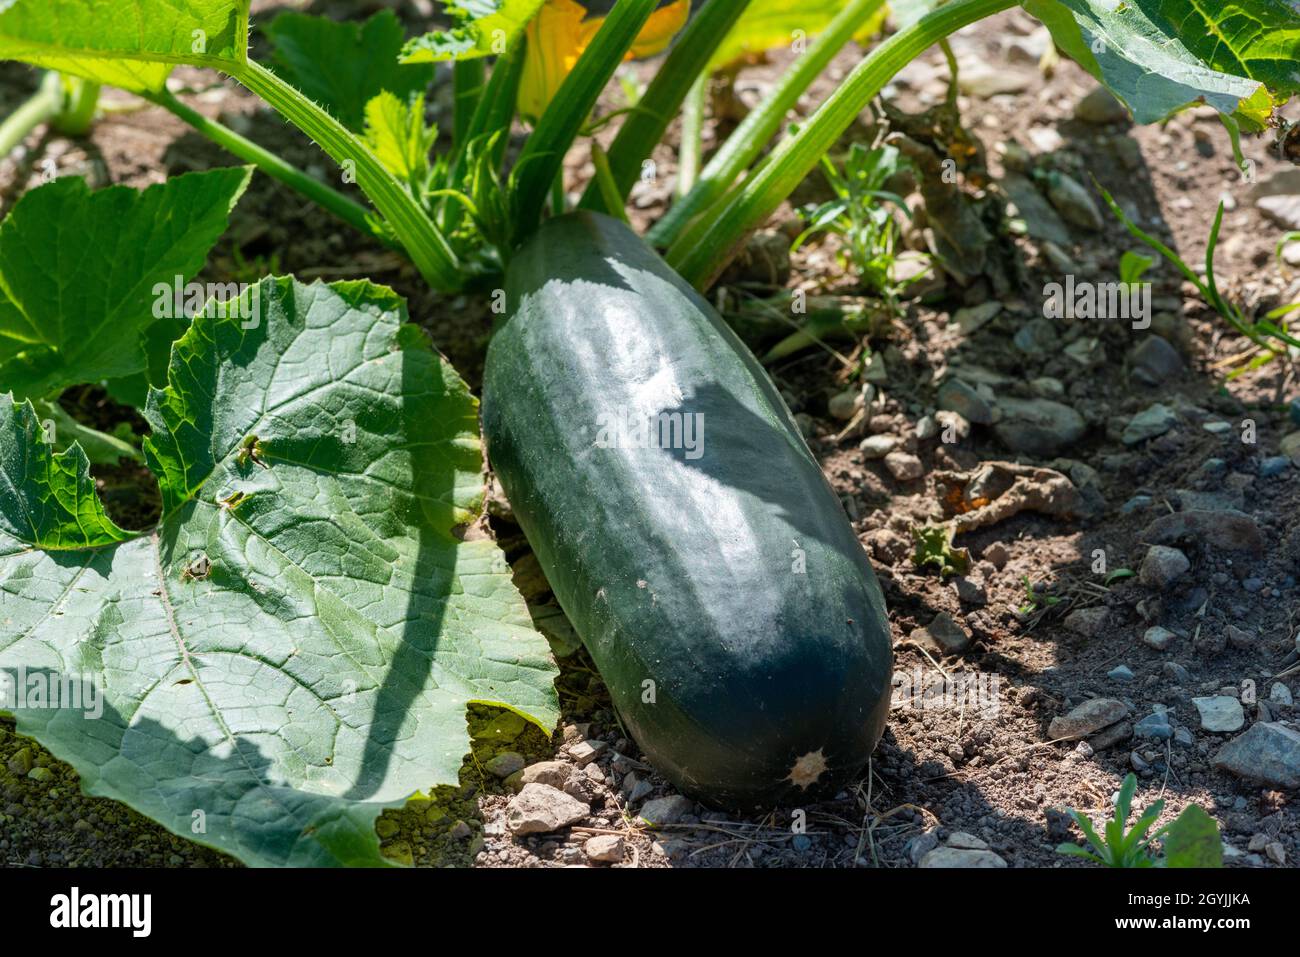 A large raw green oblong marrow zucchini vegetable growing on the ground with large leaves and tall stems.The fresh colorful organic crop. Stock Photo